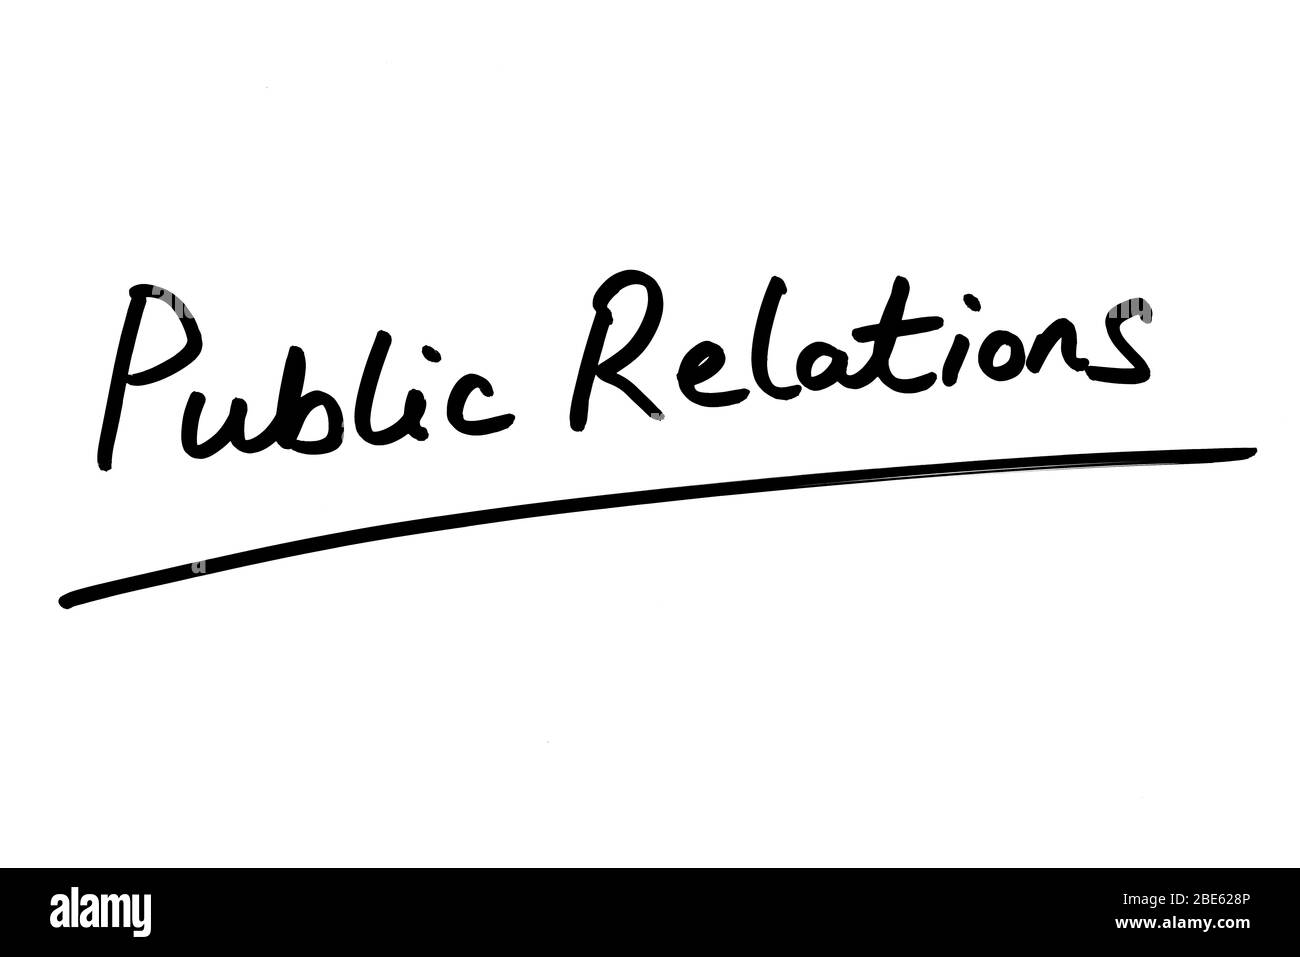 Public Relations handwritten on a white background. Stock Photo